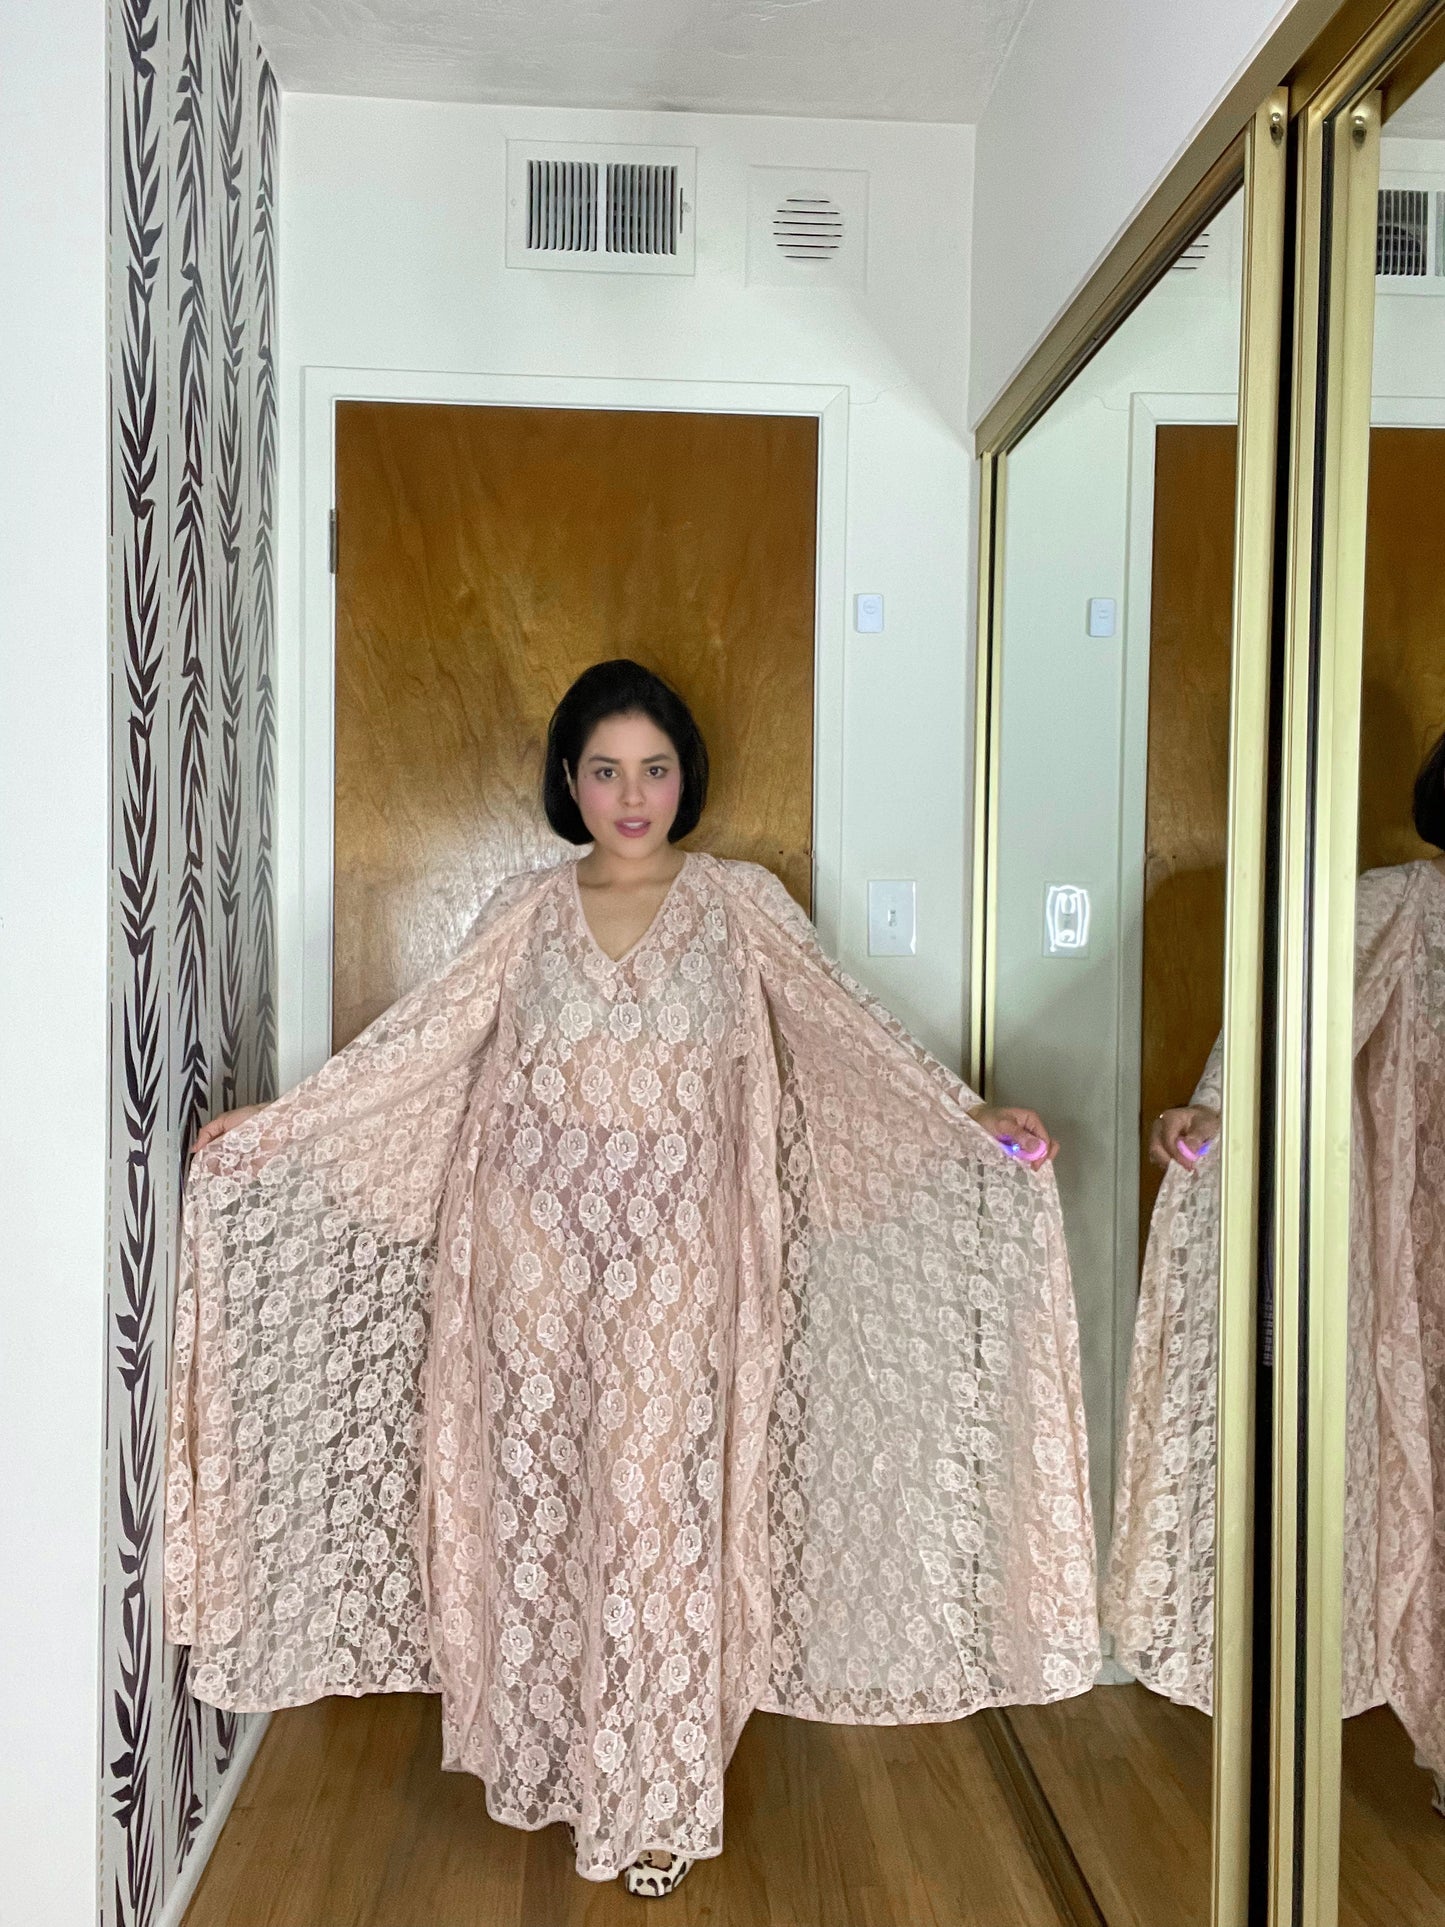 Vintage 60s / 70s Rose Pink Lace Sheer Caftan Matching Duster w/ Bell Sleeves Fits Most Sizes